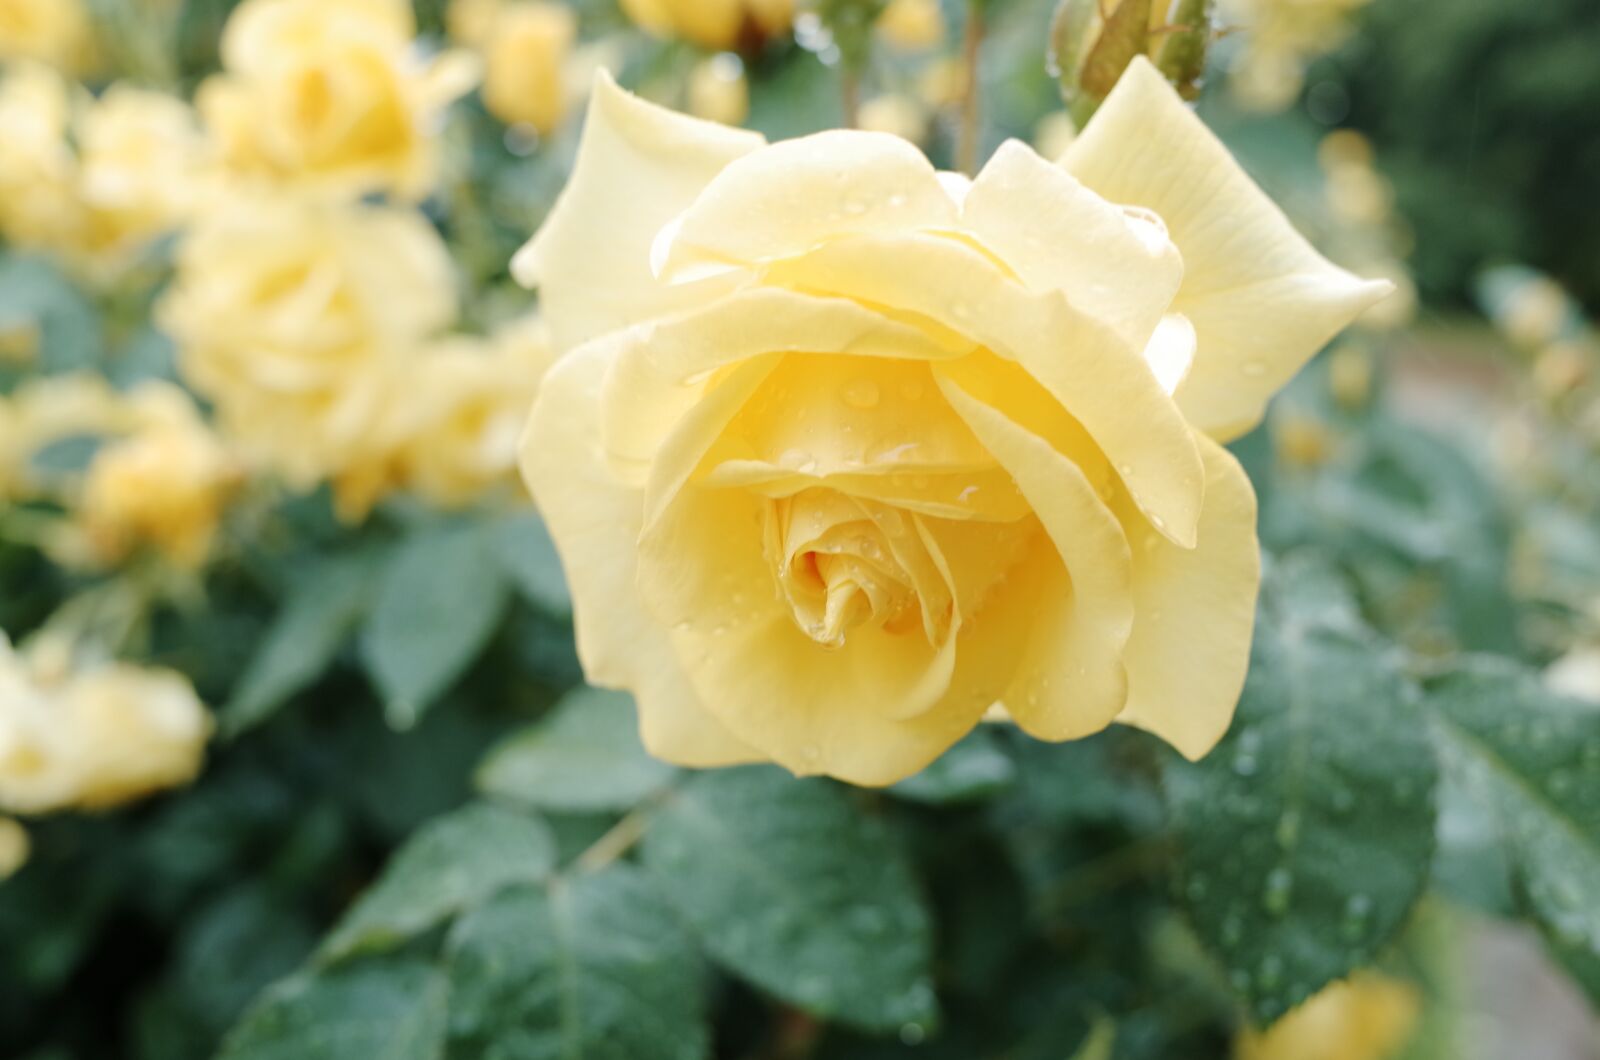 Ricoh GR sample photo. Flower, roses, yellow roses photography